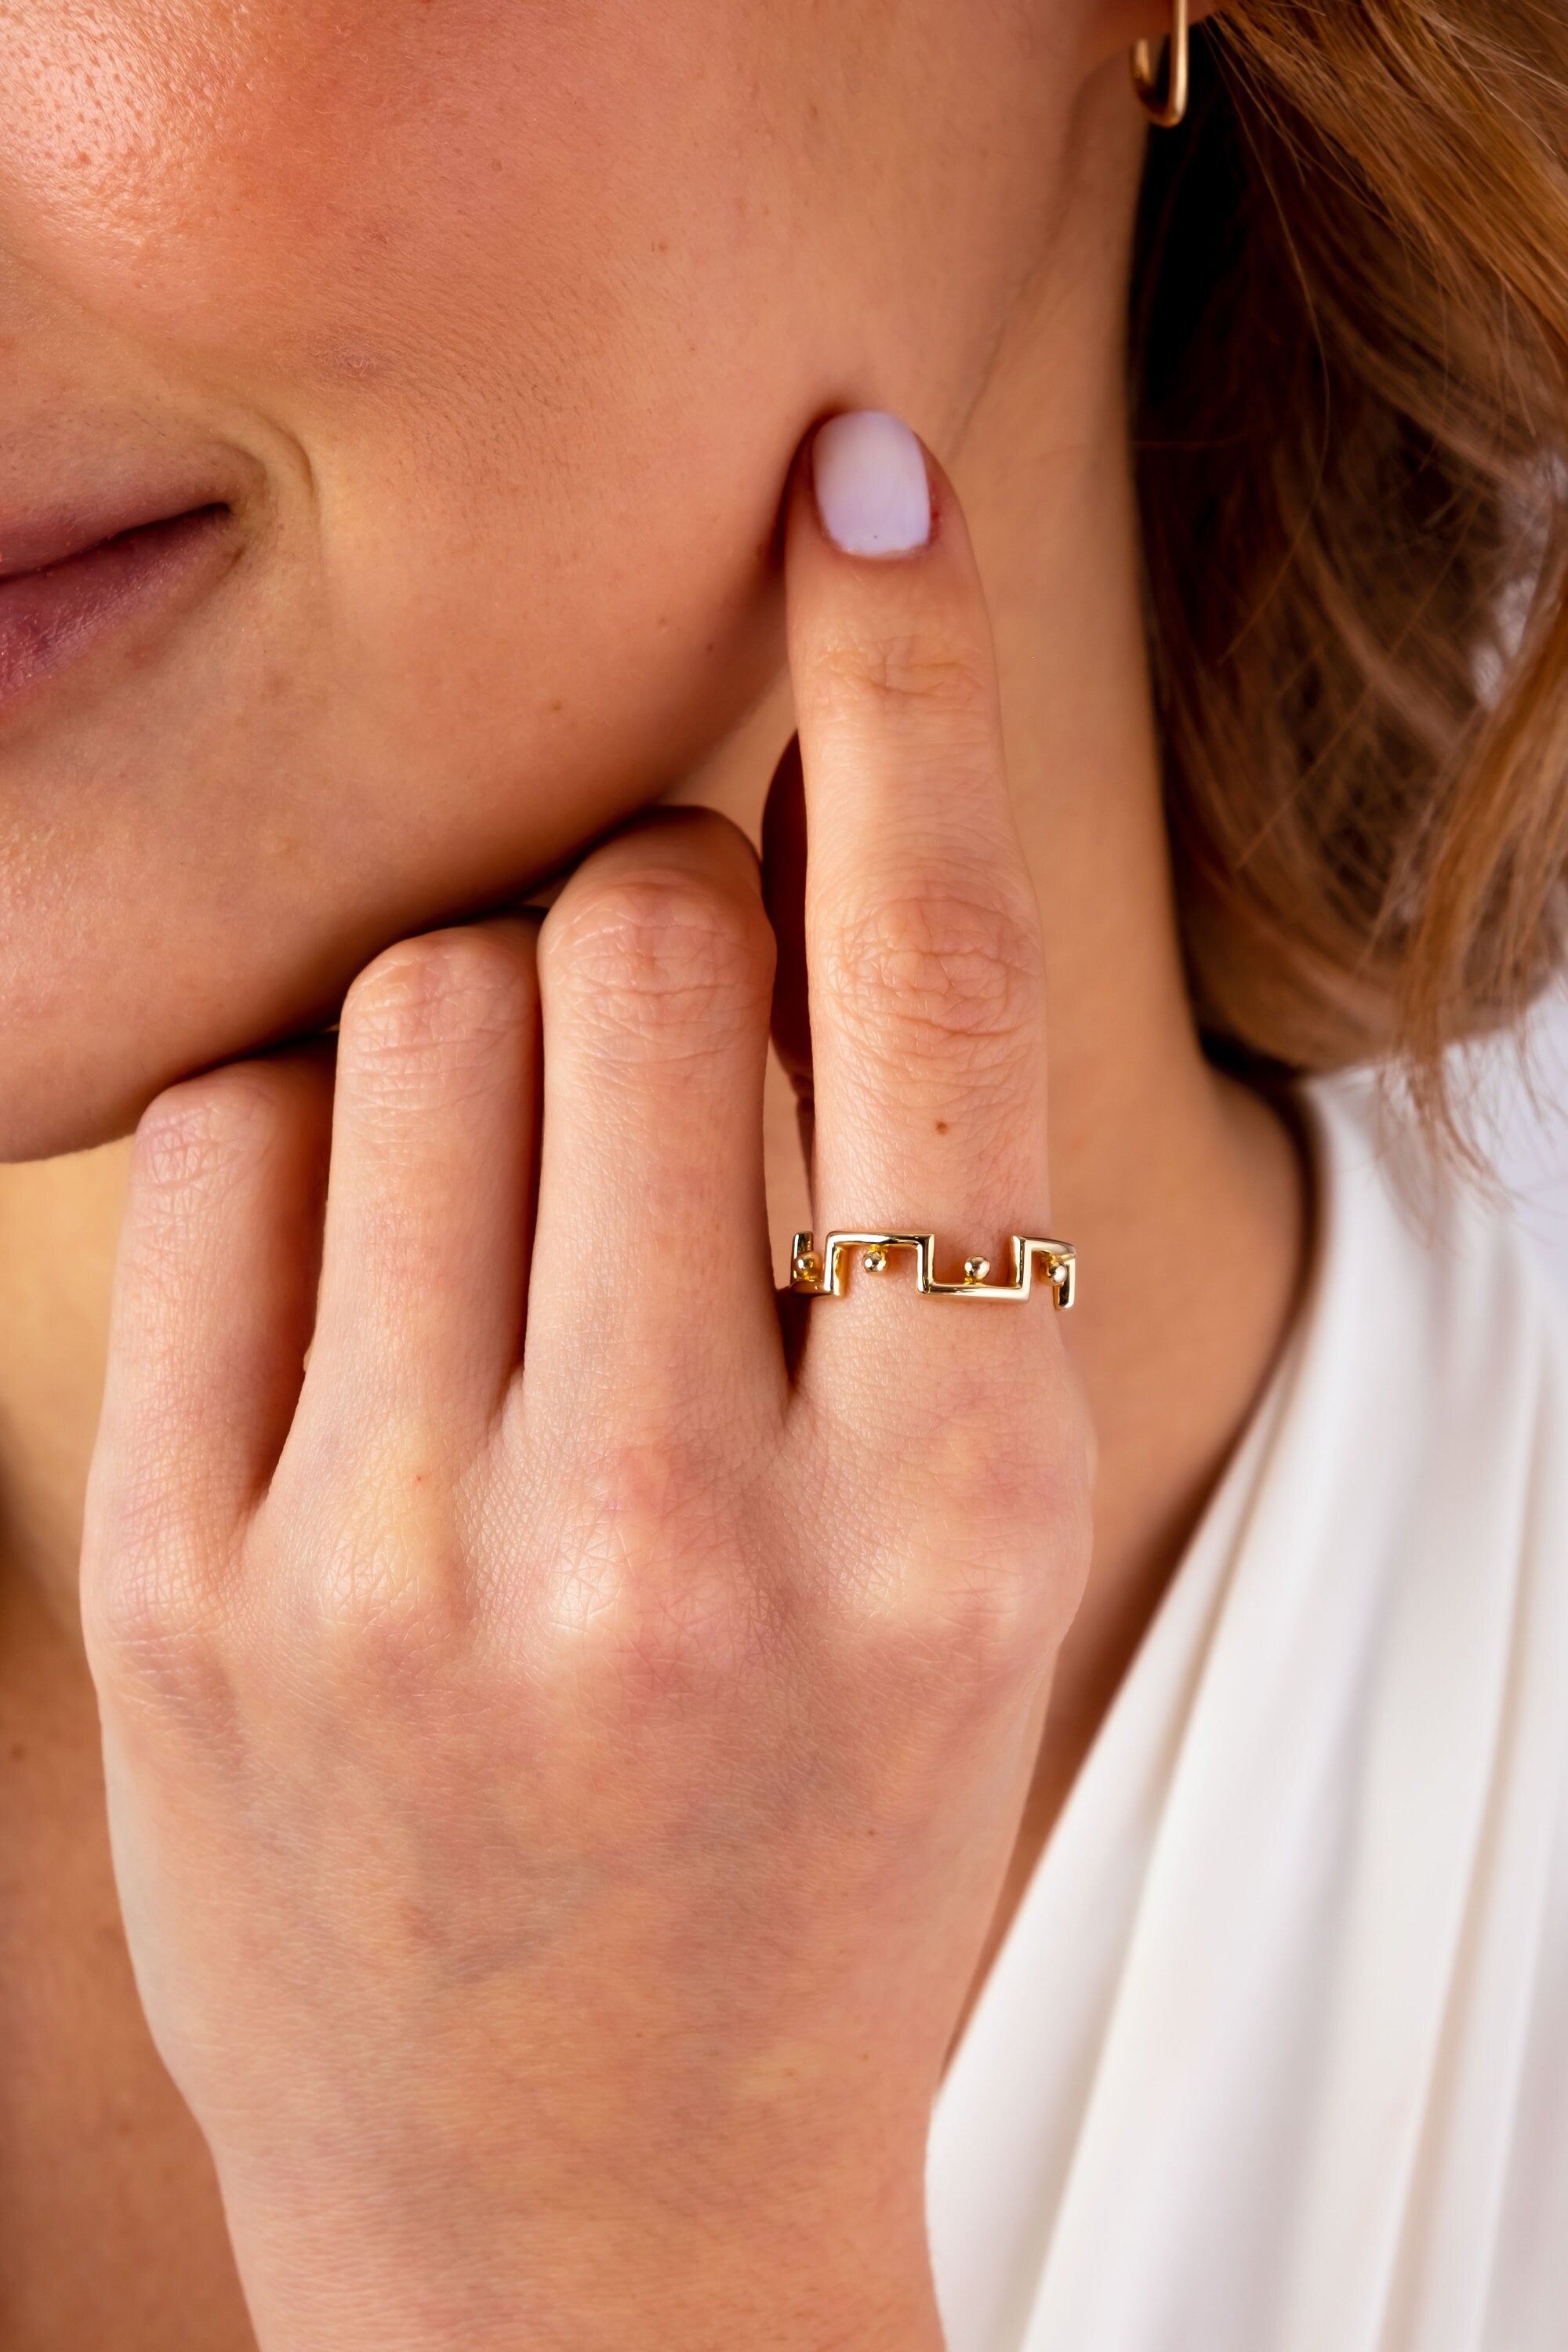 14K Gold Edge Ring, Dainty Geometric Bead Ring, Chunky Edge Gold Ring, Designer Thick Band Statement Ring, Angular Ring Real Gold